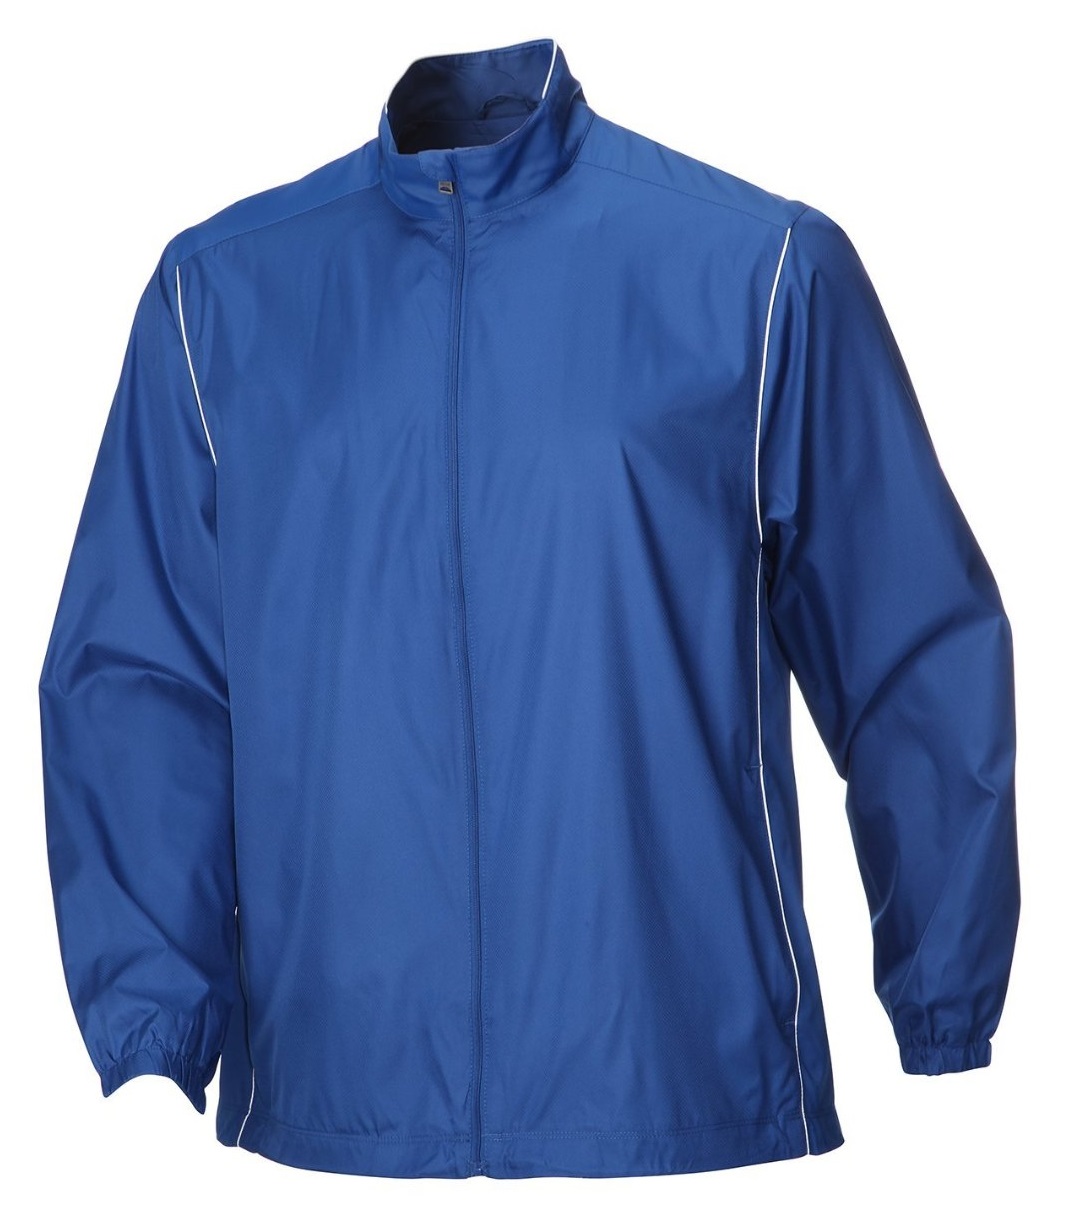 Mens Greg Norman Water Resistant Performance Jackets